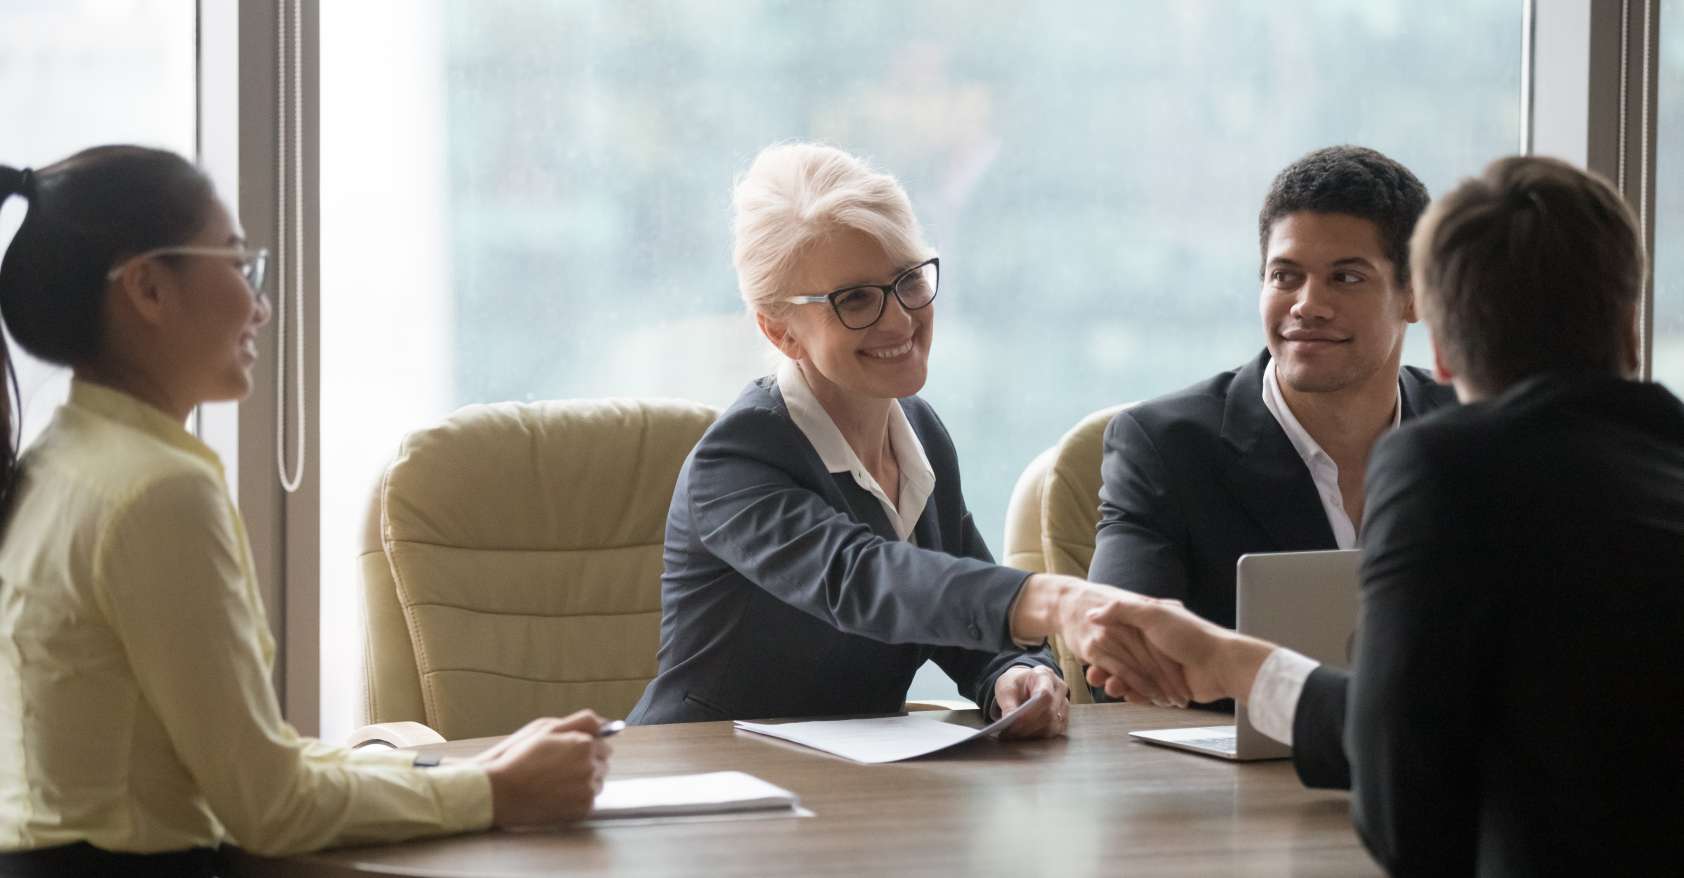 Older woman job candidate shakes hands in group interview